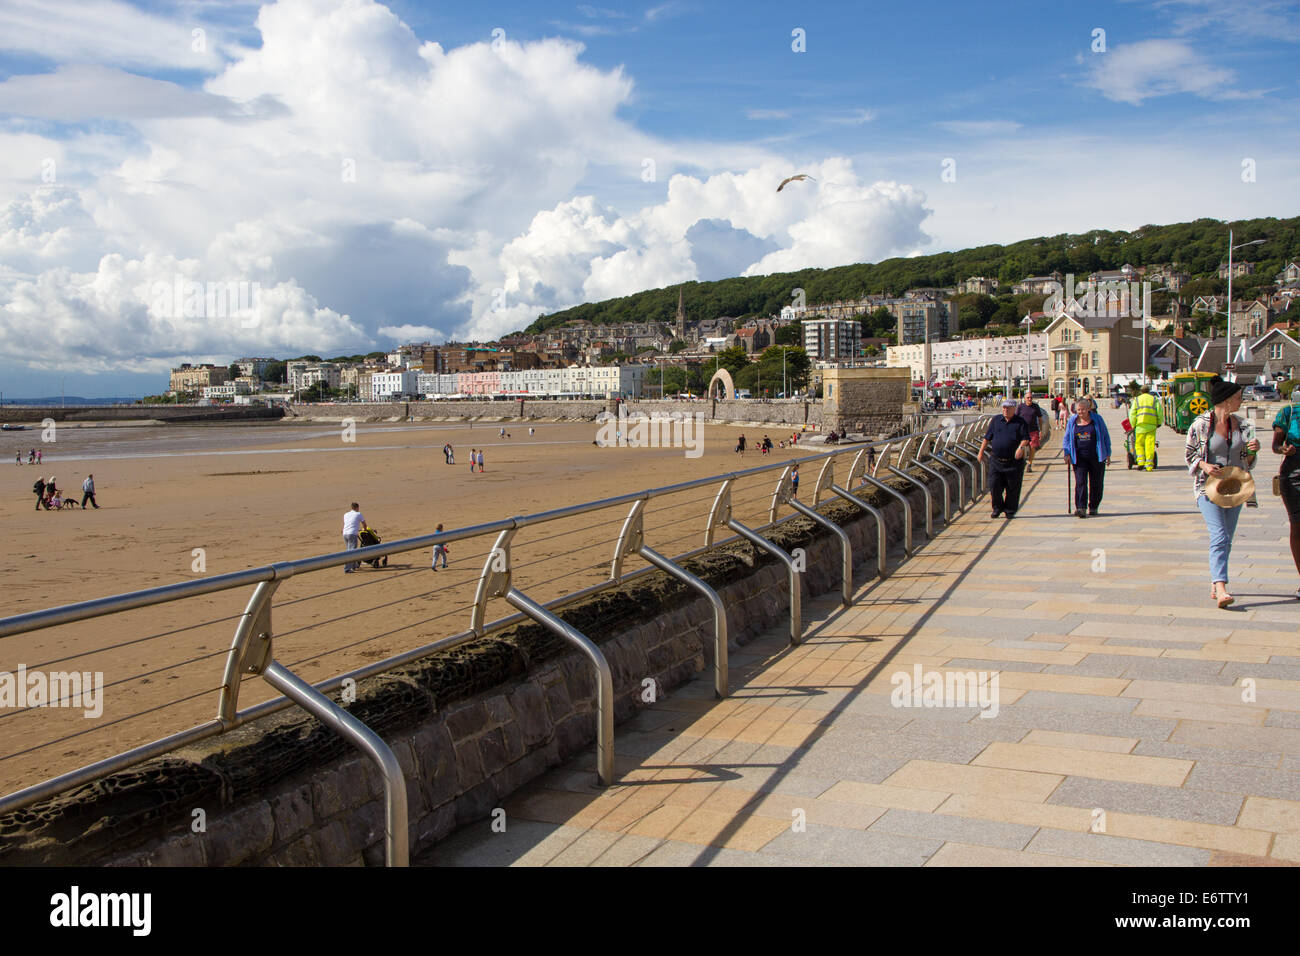 The Waterfront and beach at Weston Super Mare Stock Photo